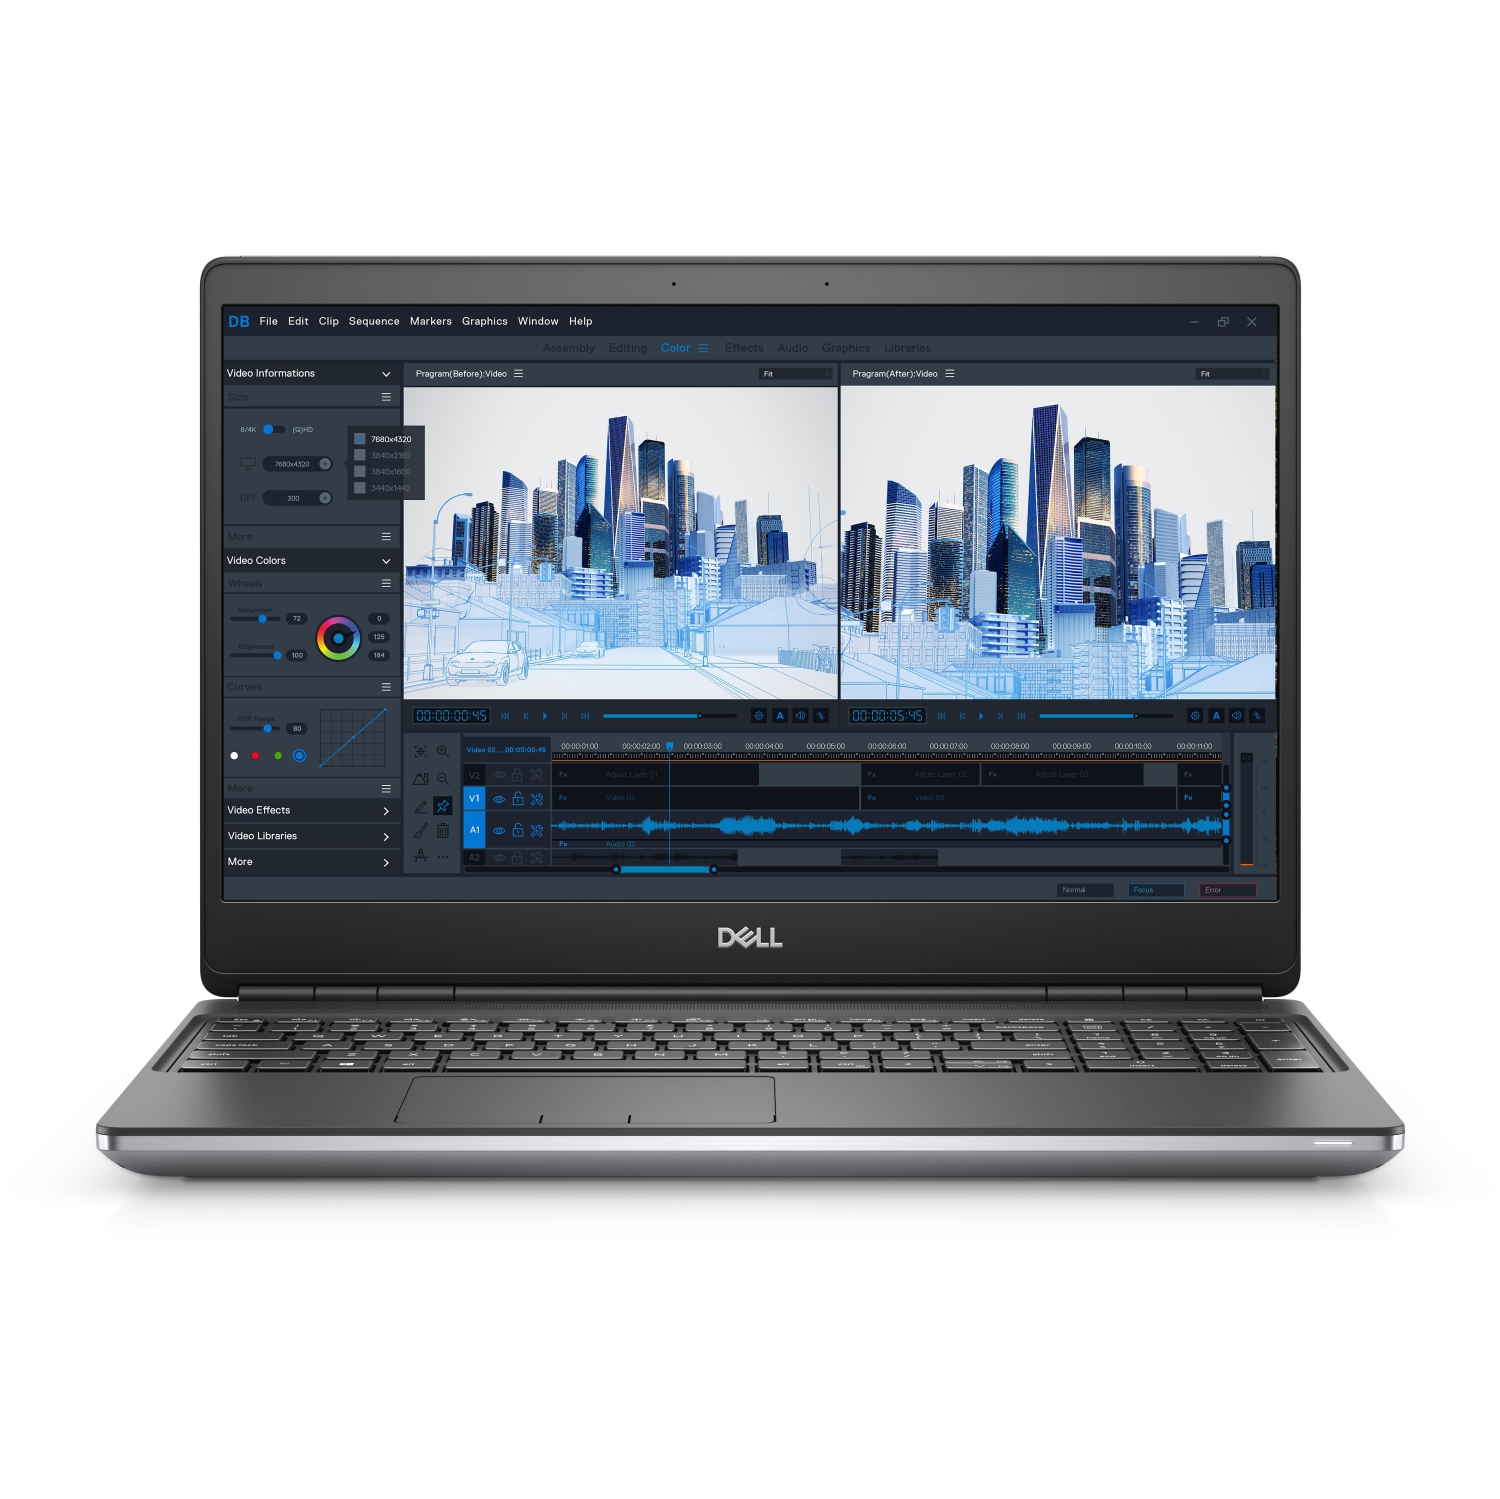 Refurbished (Excellent) - Dell Precision 7000 7560 Workstation Laptop (2021), 15.6" FHD, Core i7, 1TB SSD, 32GB RAM, RTX A5000, 4.8 GHz, 11th Gen CPU Certified